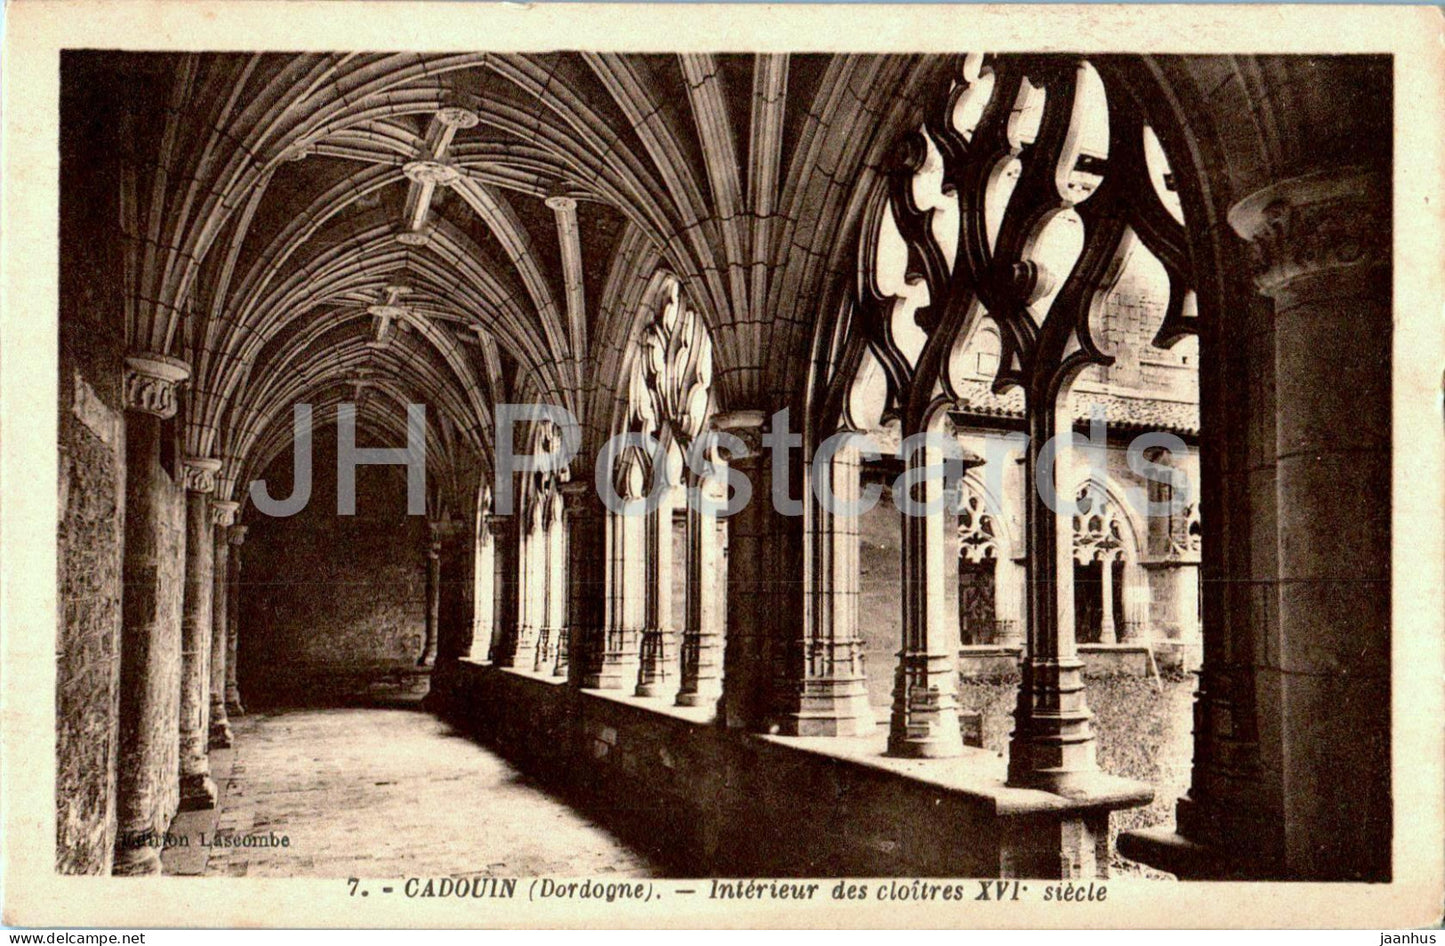 Cadouin - Interieur des Cloitres - Interior of the Cloister - 7 - old postcard - France - unused - JH Postcards